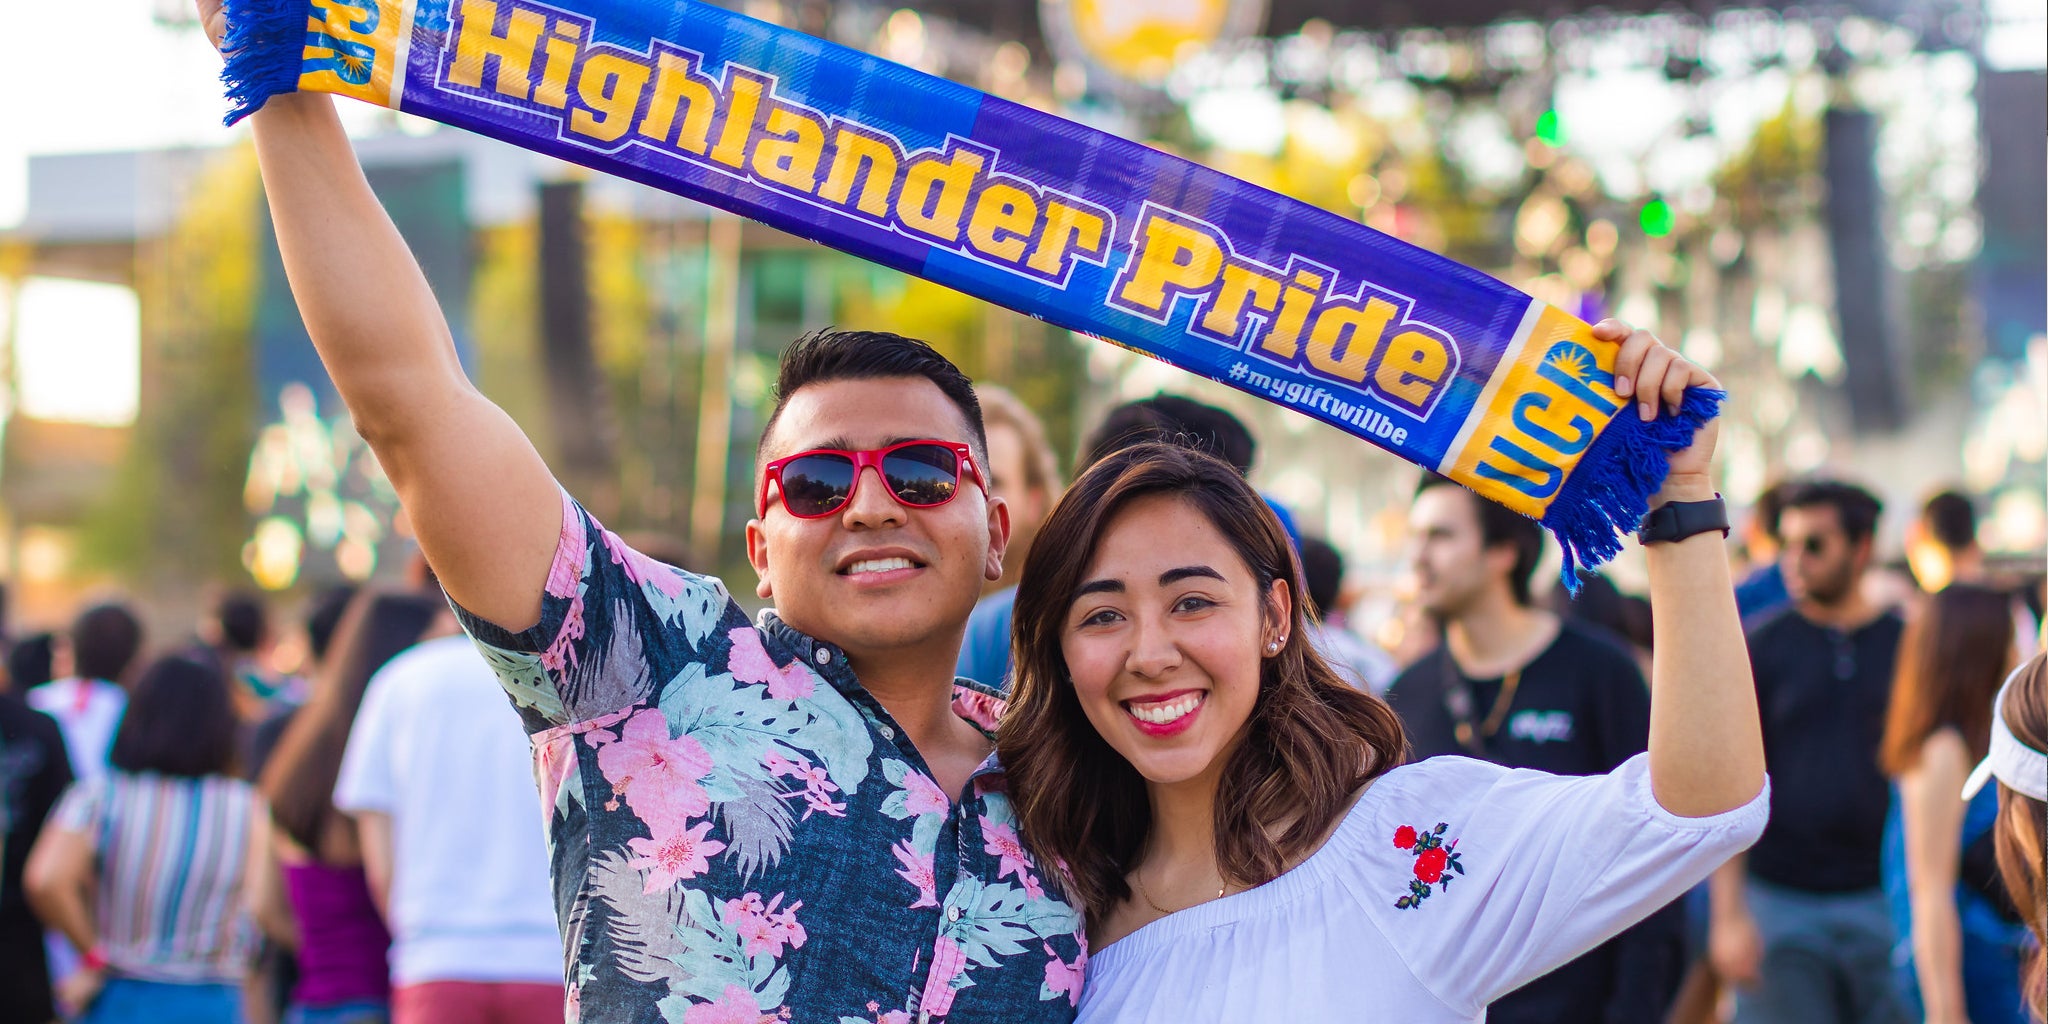 Two students post with a Highlander Pride scarf at a campus event.